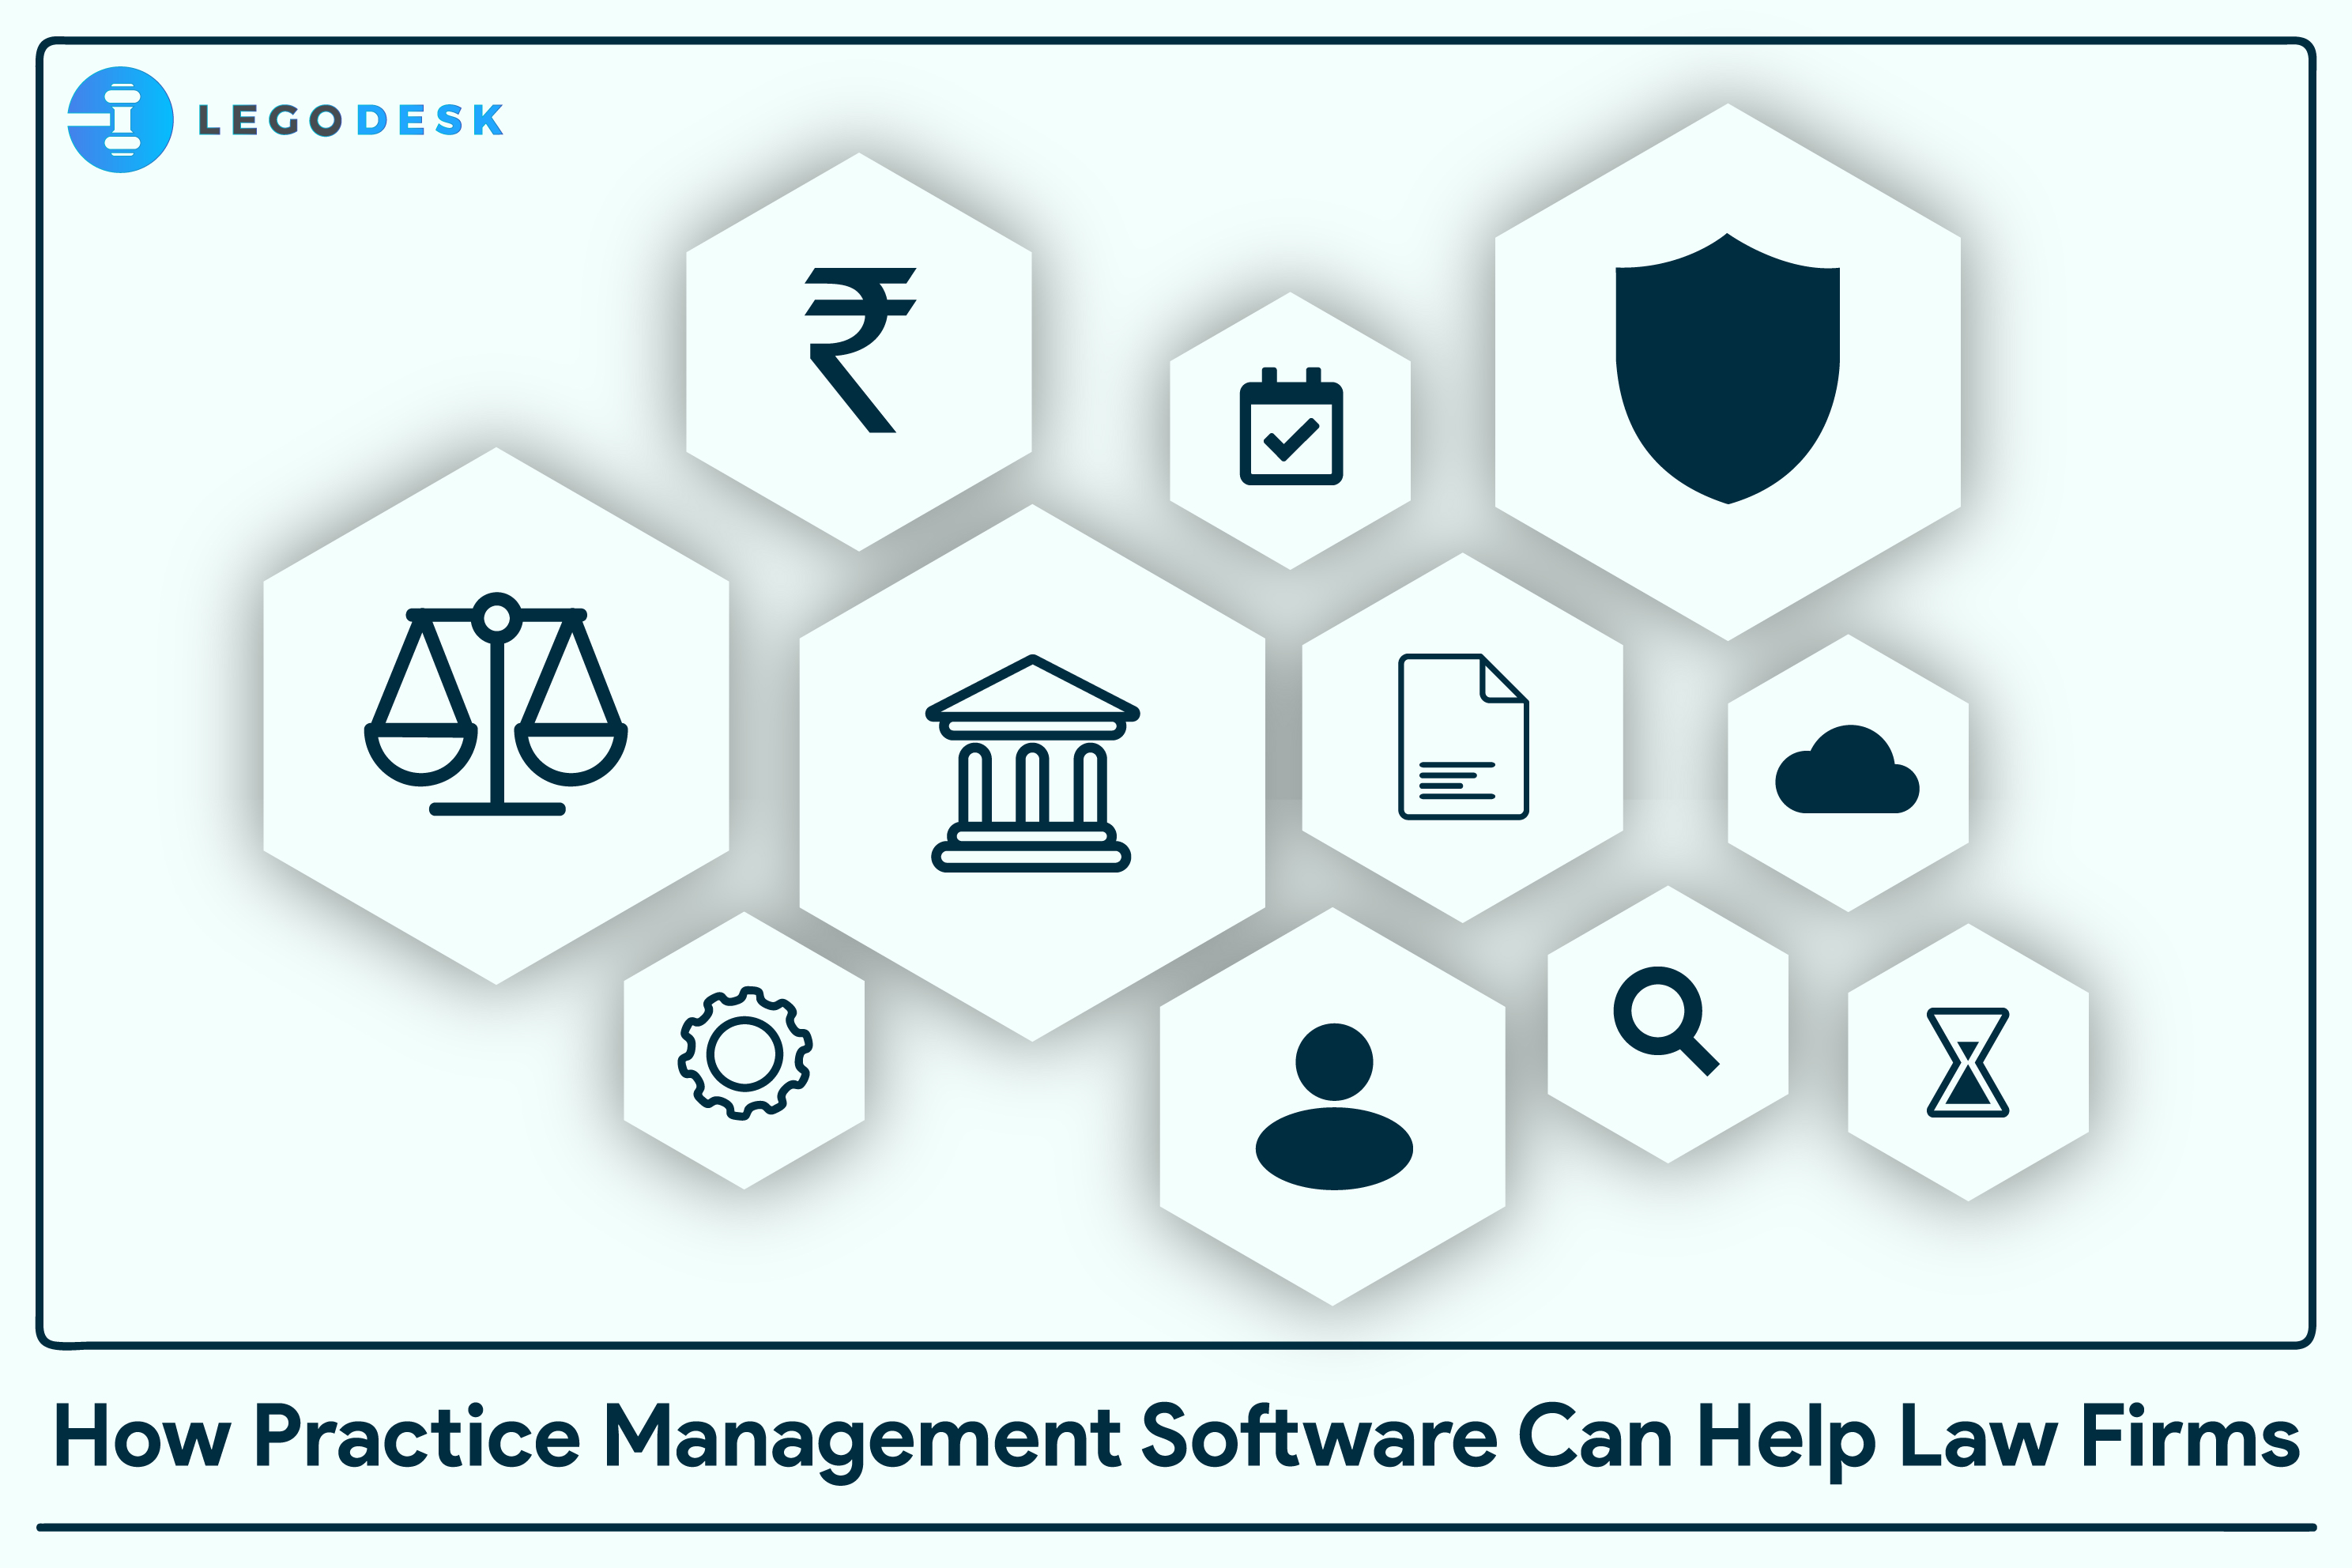 How Legal Practice Management Software Help Law Firms